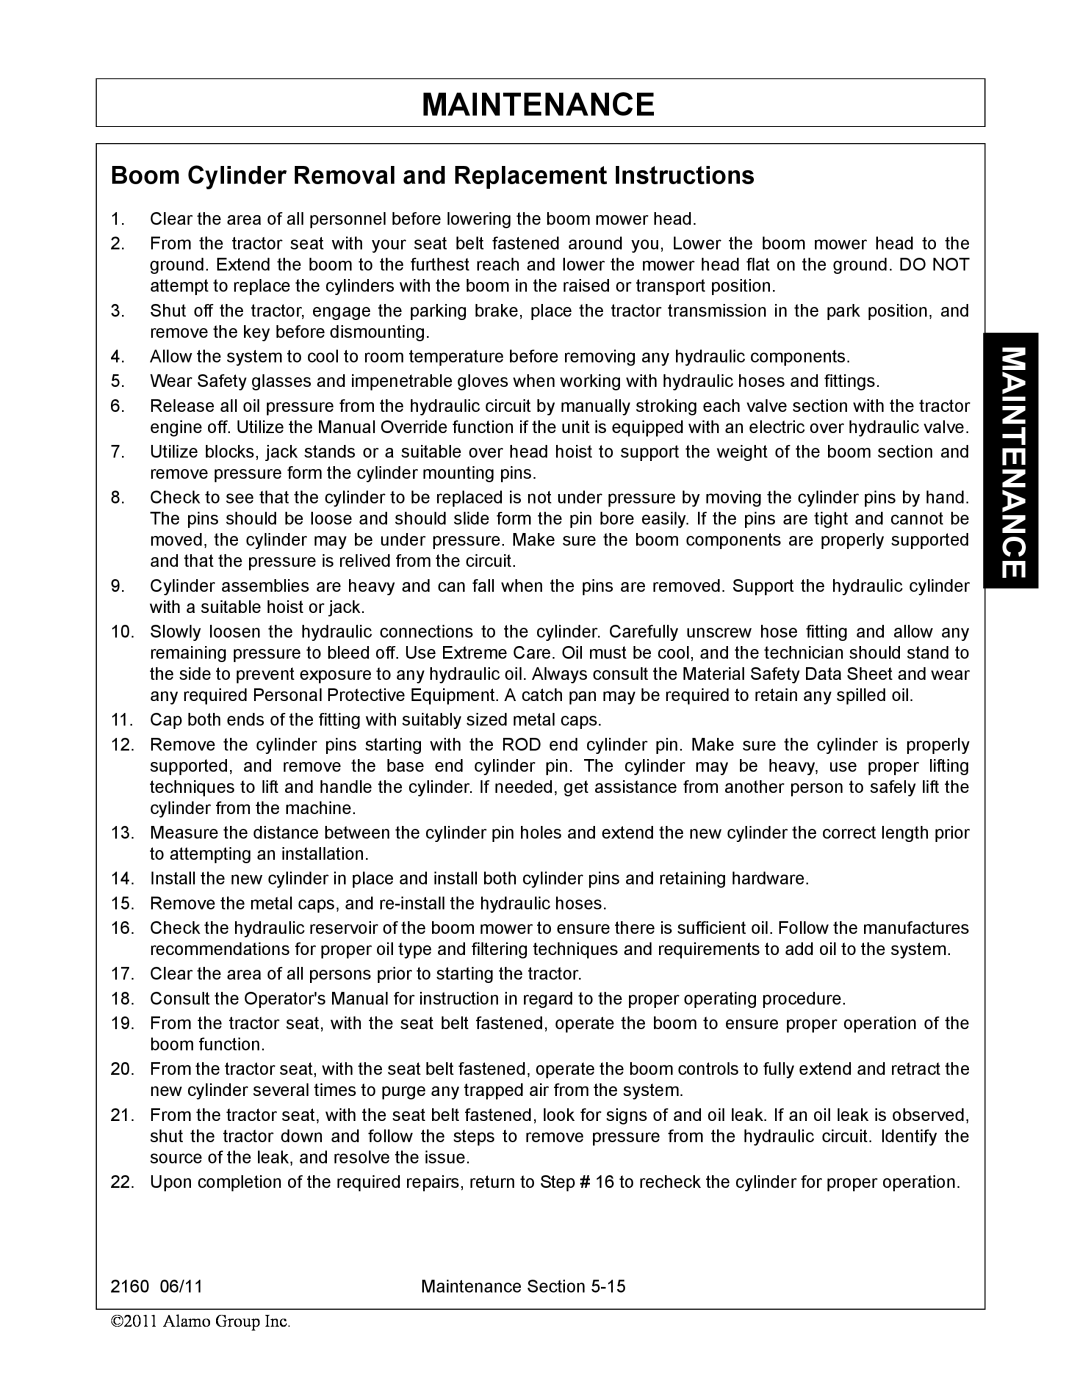 Servis-Rhino 2160 manual Boom Cylinder Removal and Replacement Instructions, Maintenance 